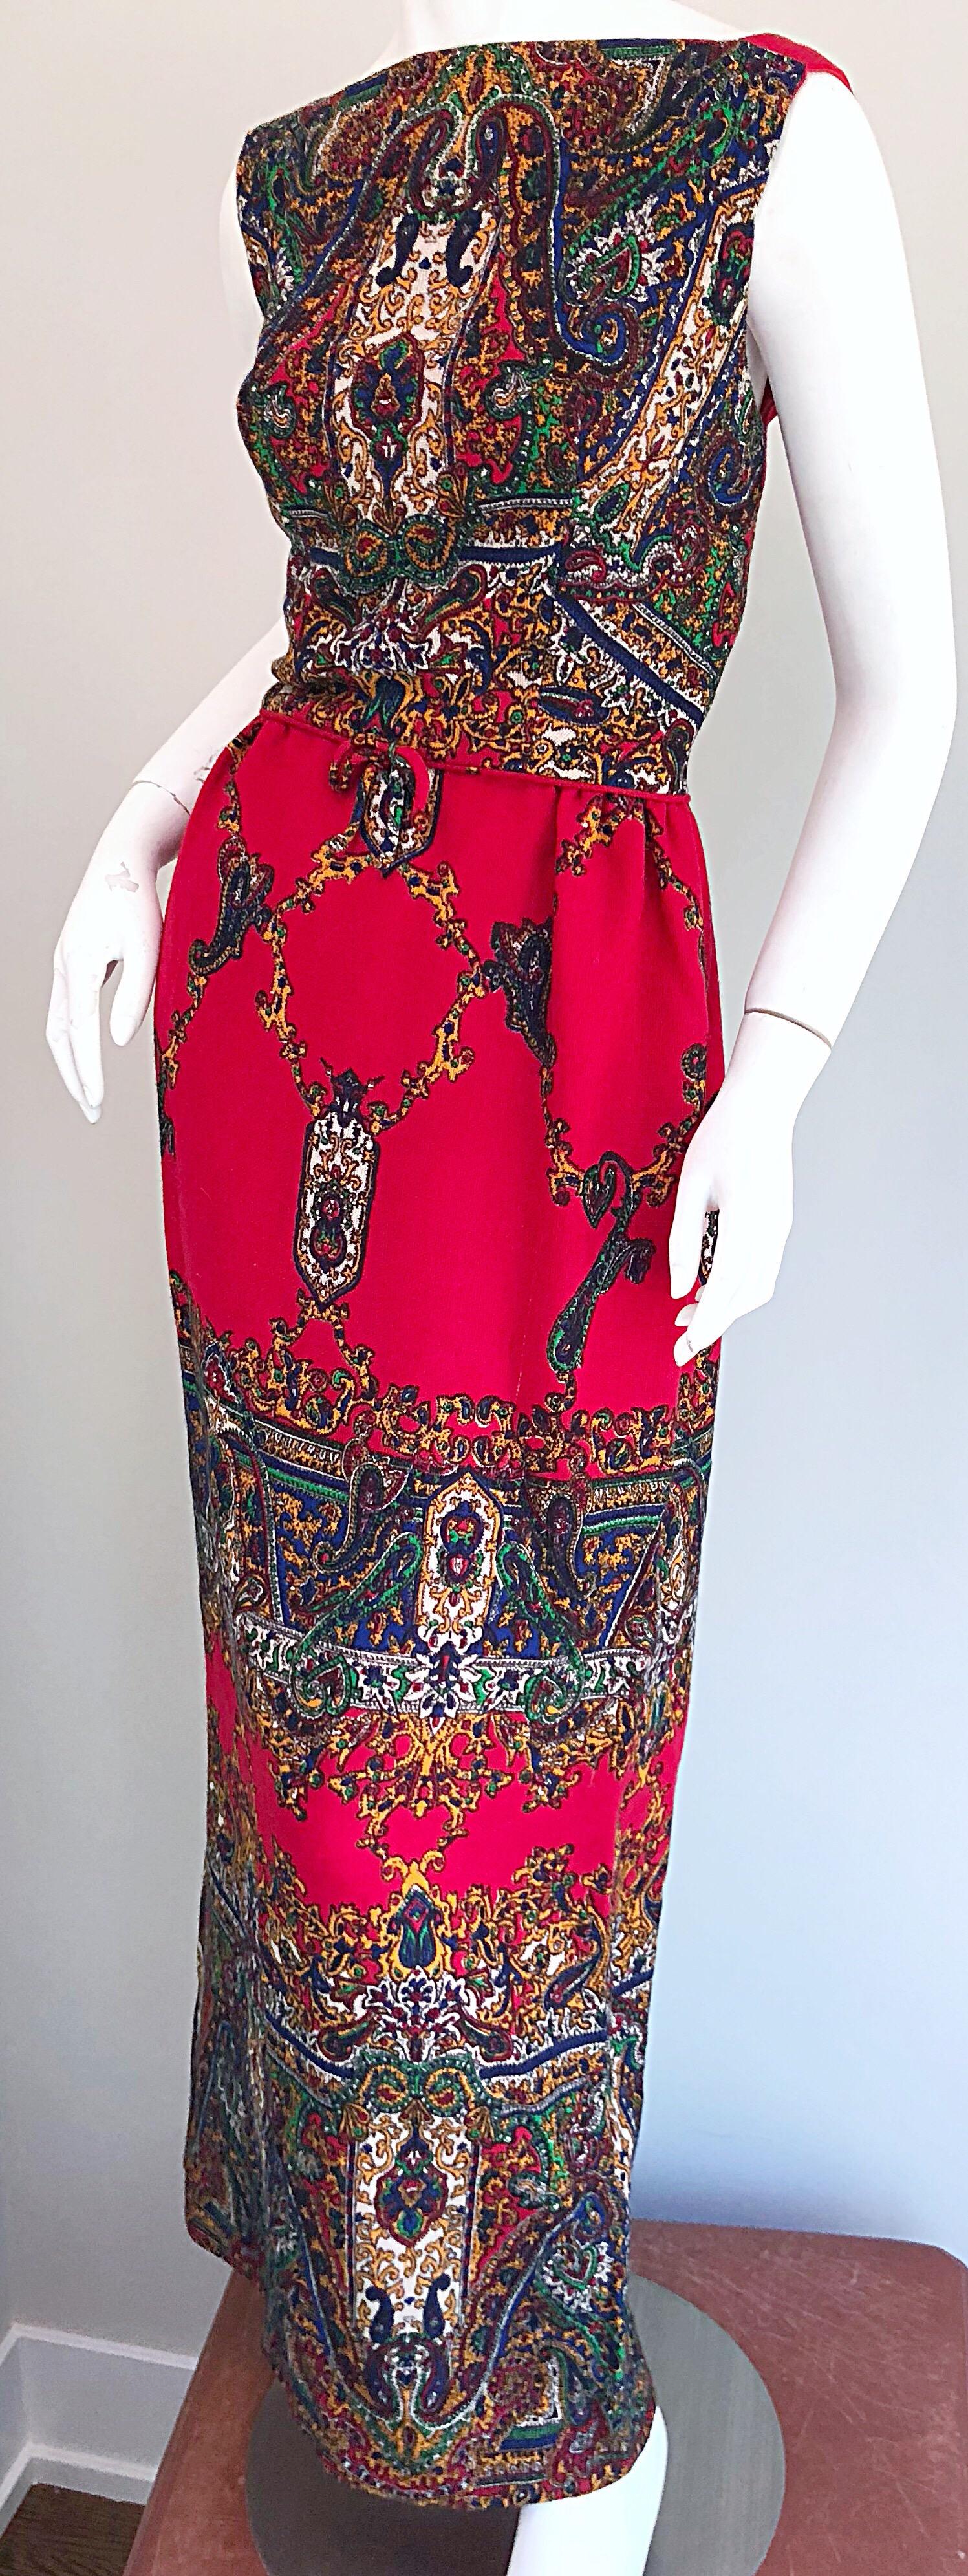 Fantastic Early 1970s Boho Chic Paisley Print Vintage Red 70s Maxi Dress For Sale 3